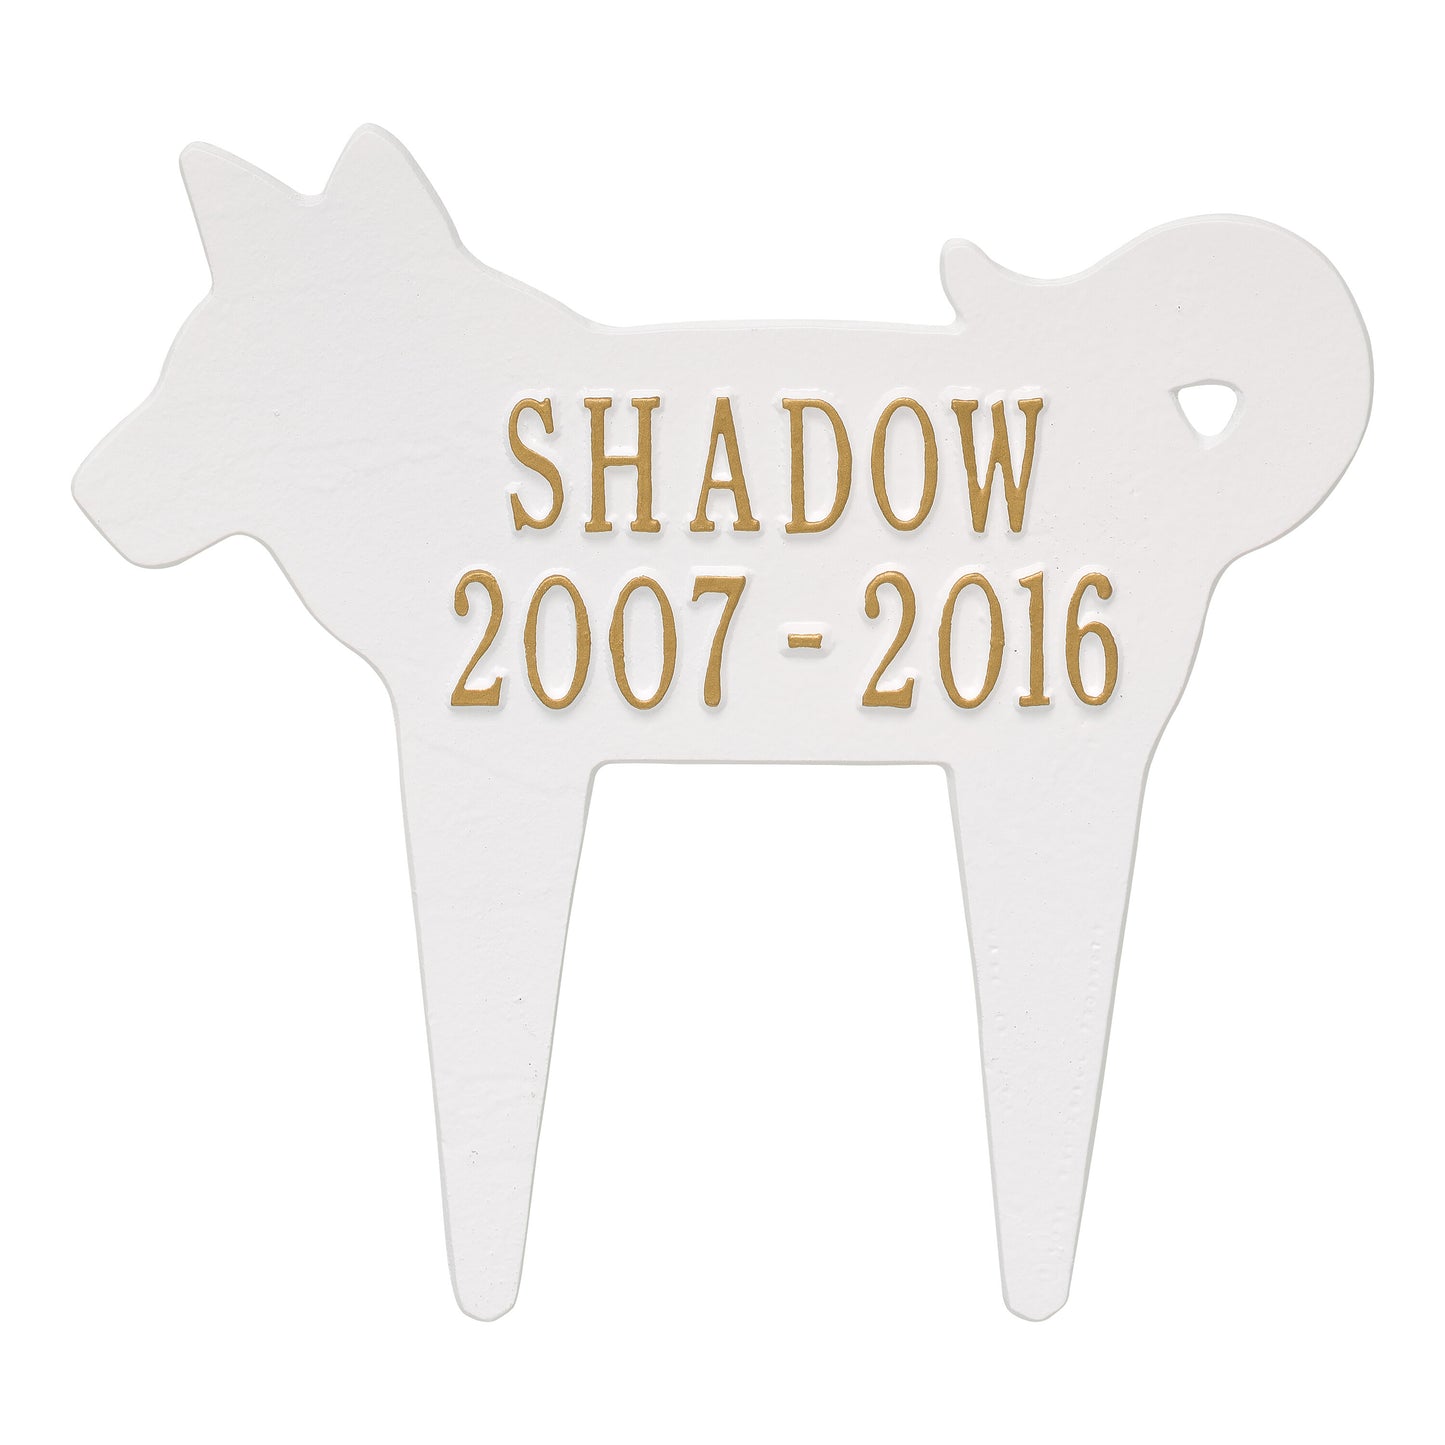 Whitehall Products Dog Silhouette Pet Memorial Personalized Lawn Plaque Two Lines 